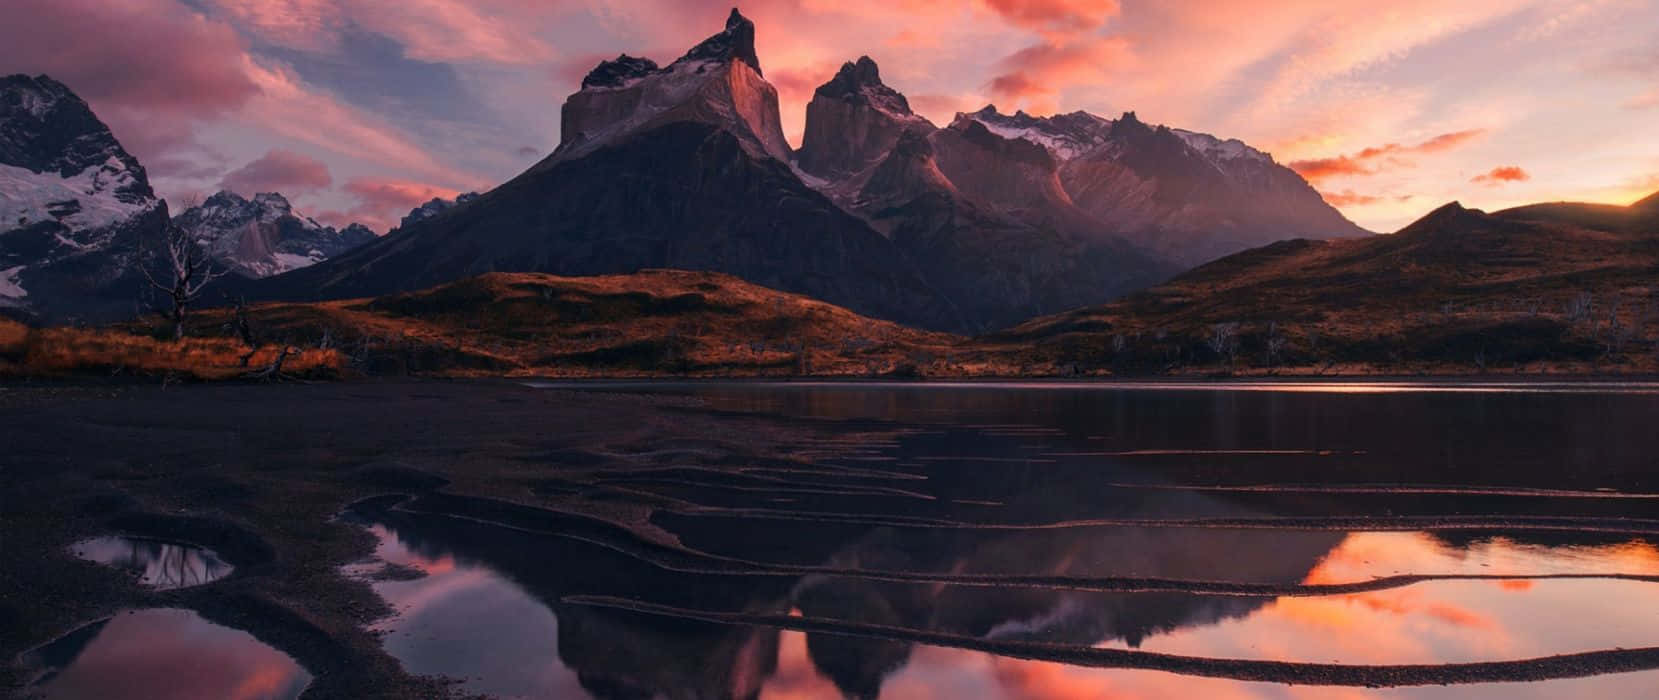 A Mountain Range Is Reflected In A Lake At Sunset Wallpaper